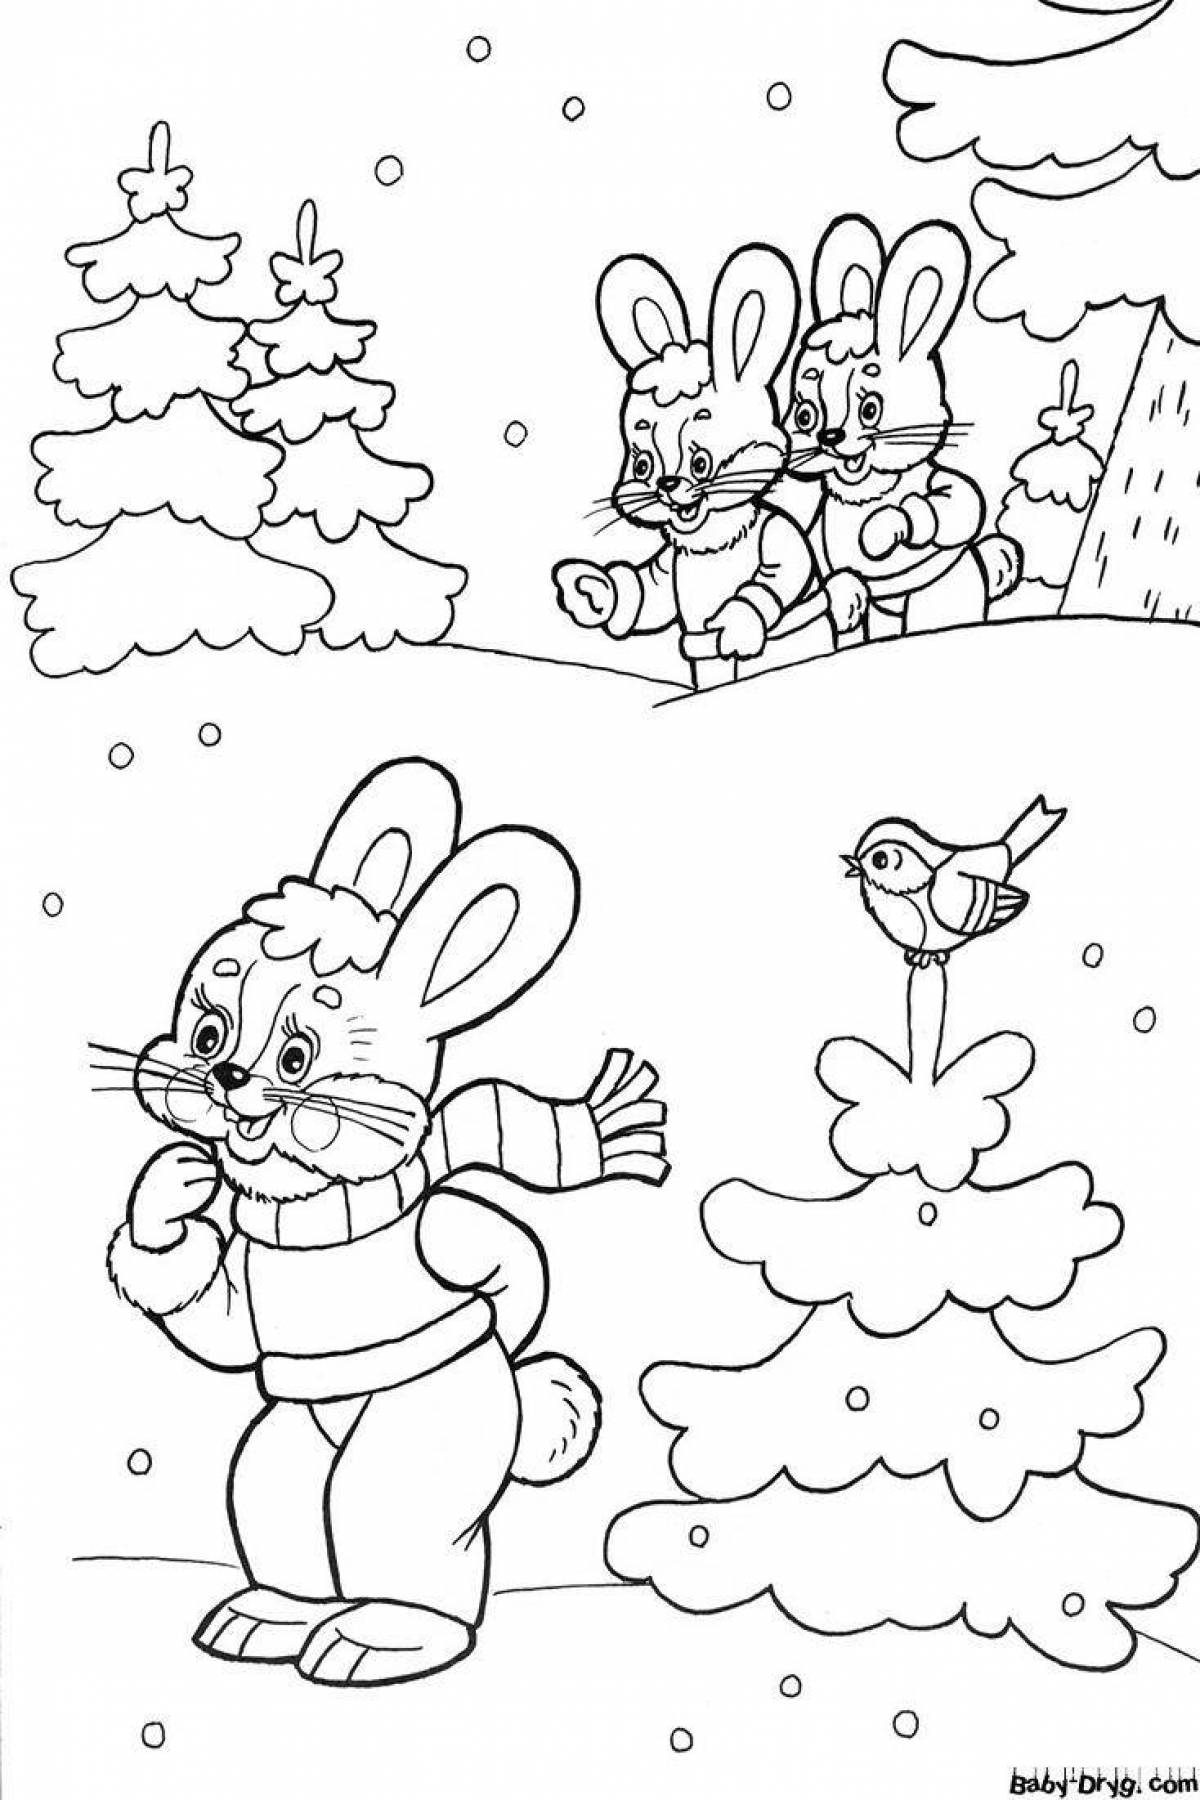 Blissful winter in the forest coloring page